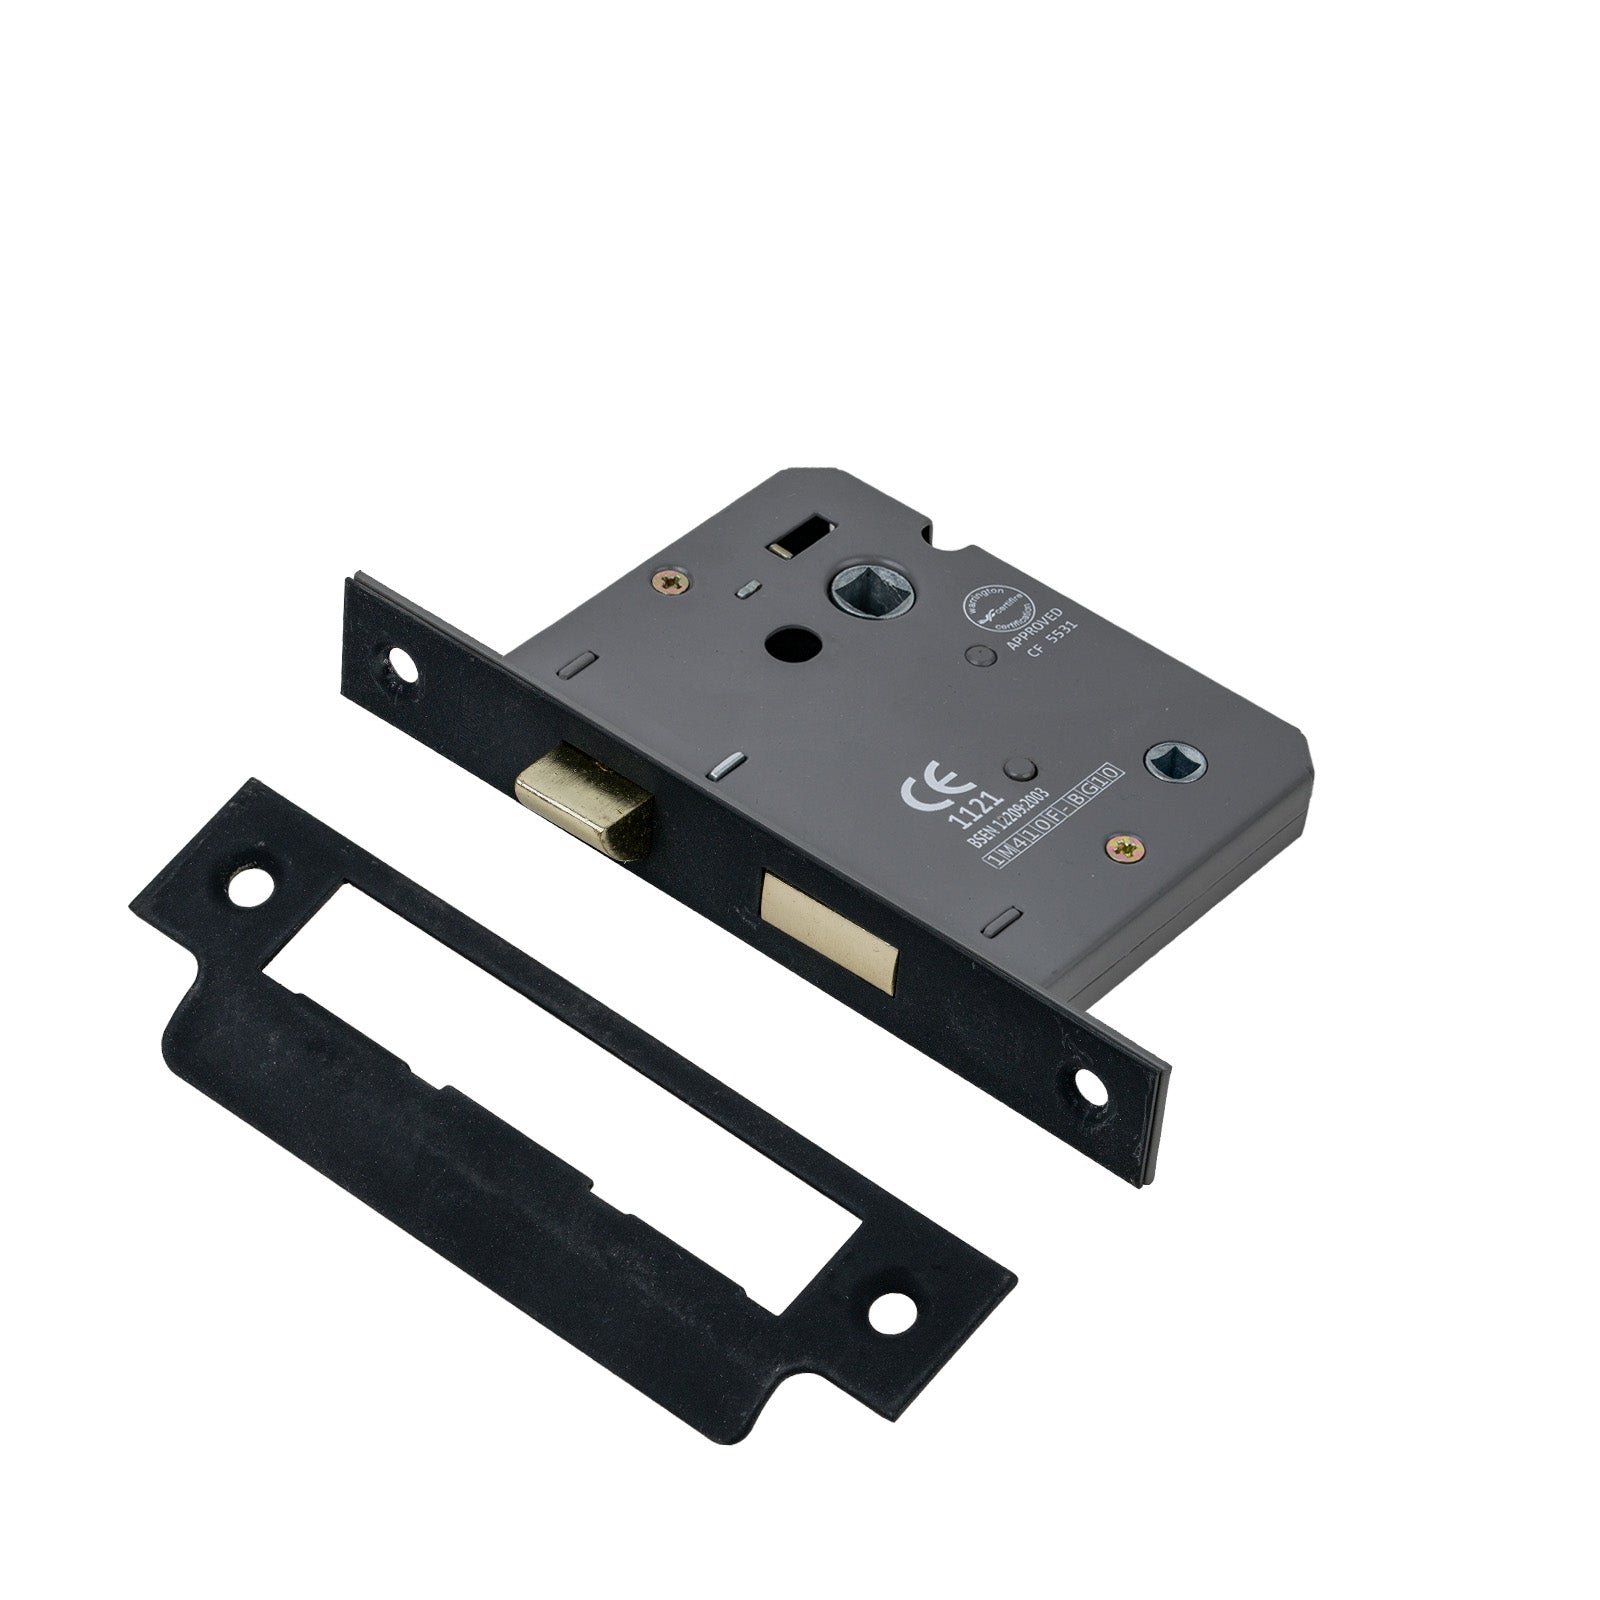 SHOW Bathroom Sash Lock - 3 Inch with Matt Black finished forend and striker plate